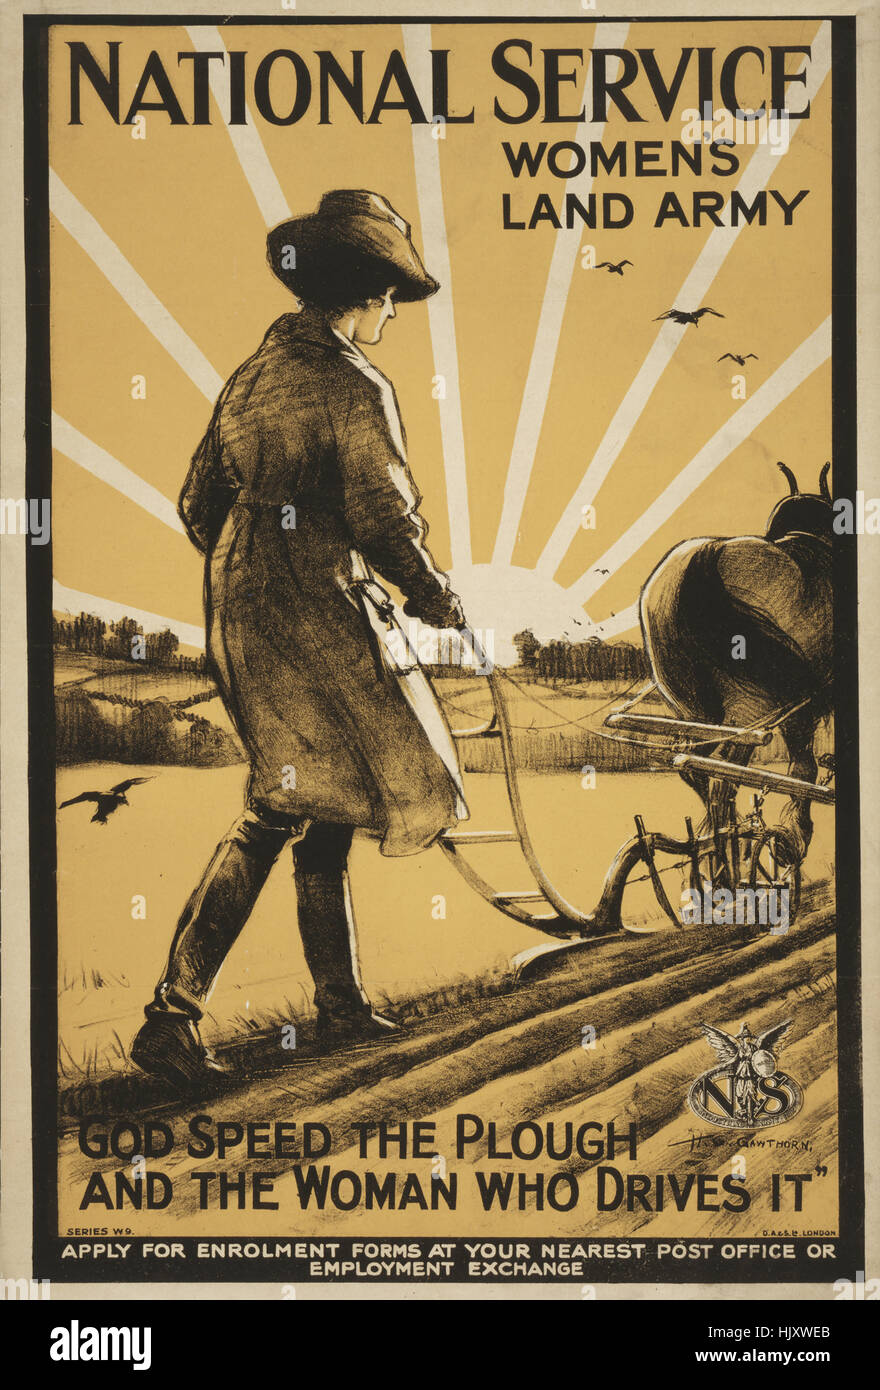 Woman Using Plow Pulled by Horse, 'National Service Women's Land Army, God Speed the Plough and the Woman who Drives it', World War I Recruitment Poster, by Henry George Gawthorn, United Kingdom, 1917 Stock Photo